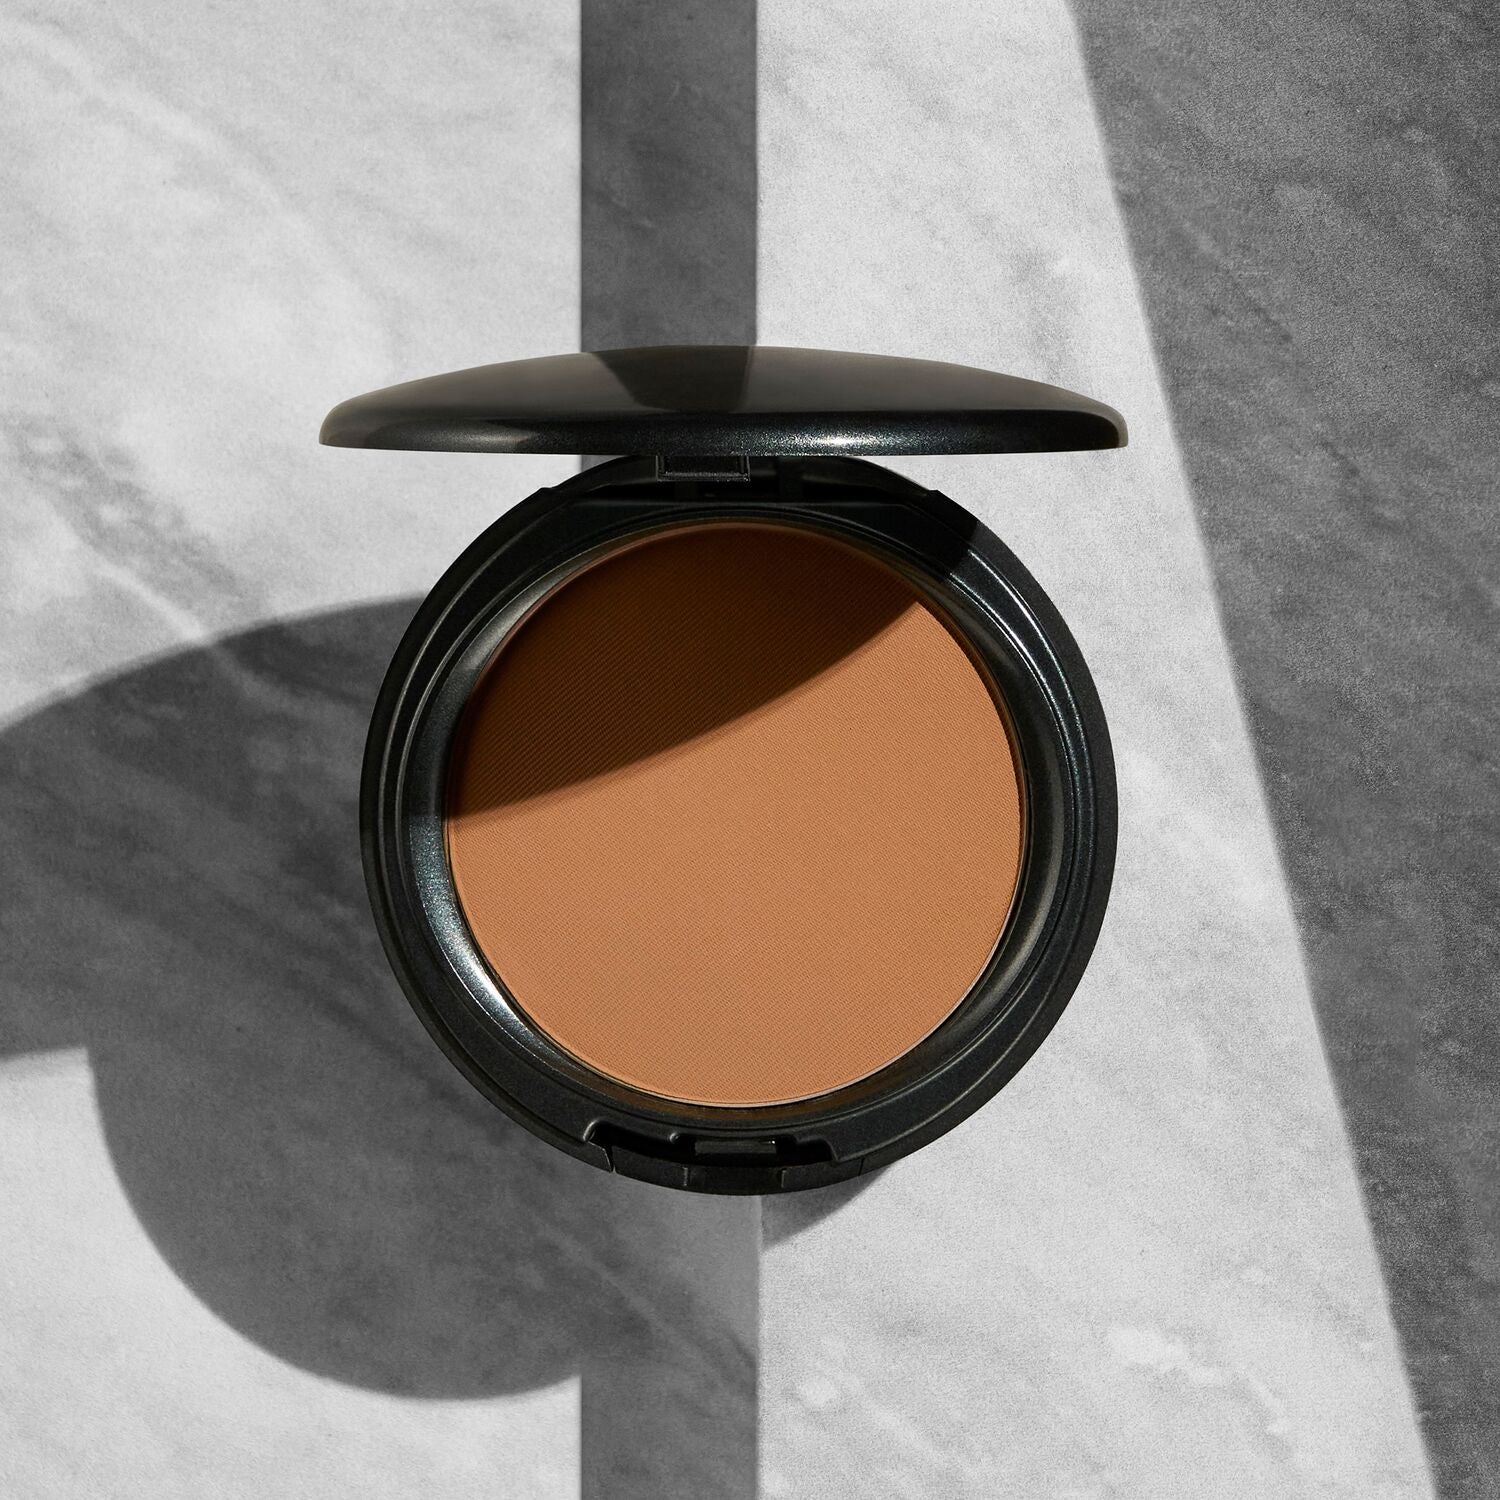 Coverfx Pressed Mineral Foundation in shade T4